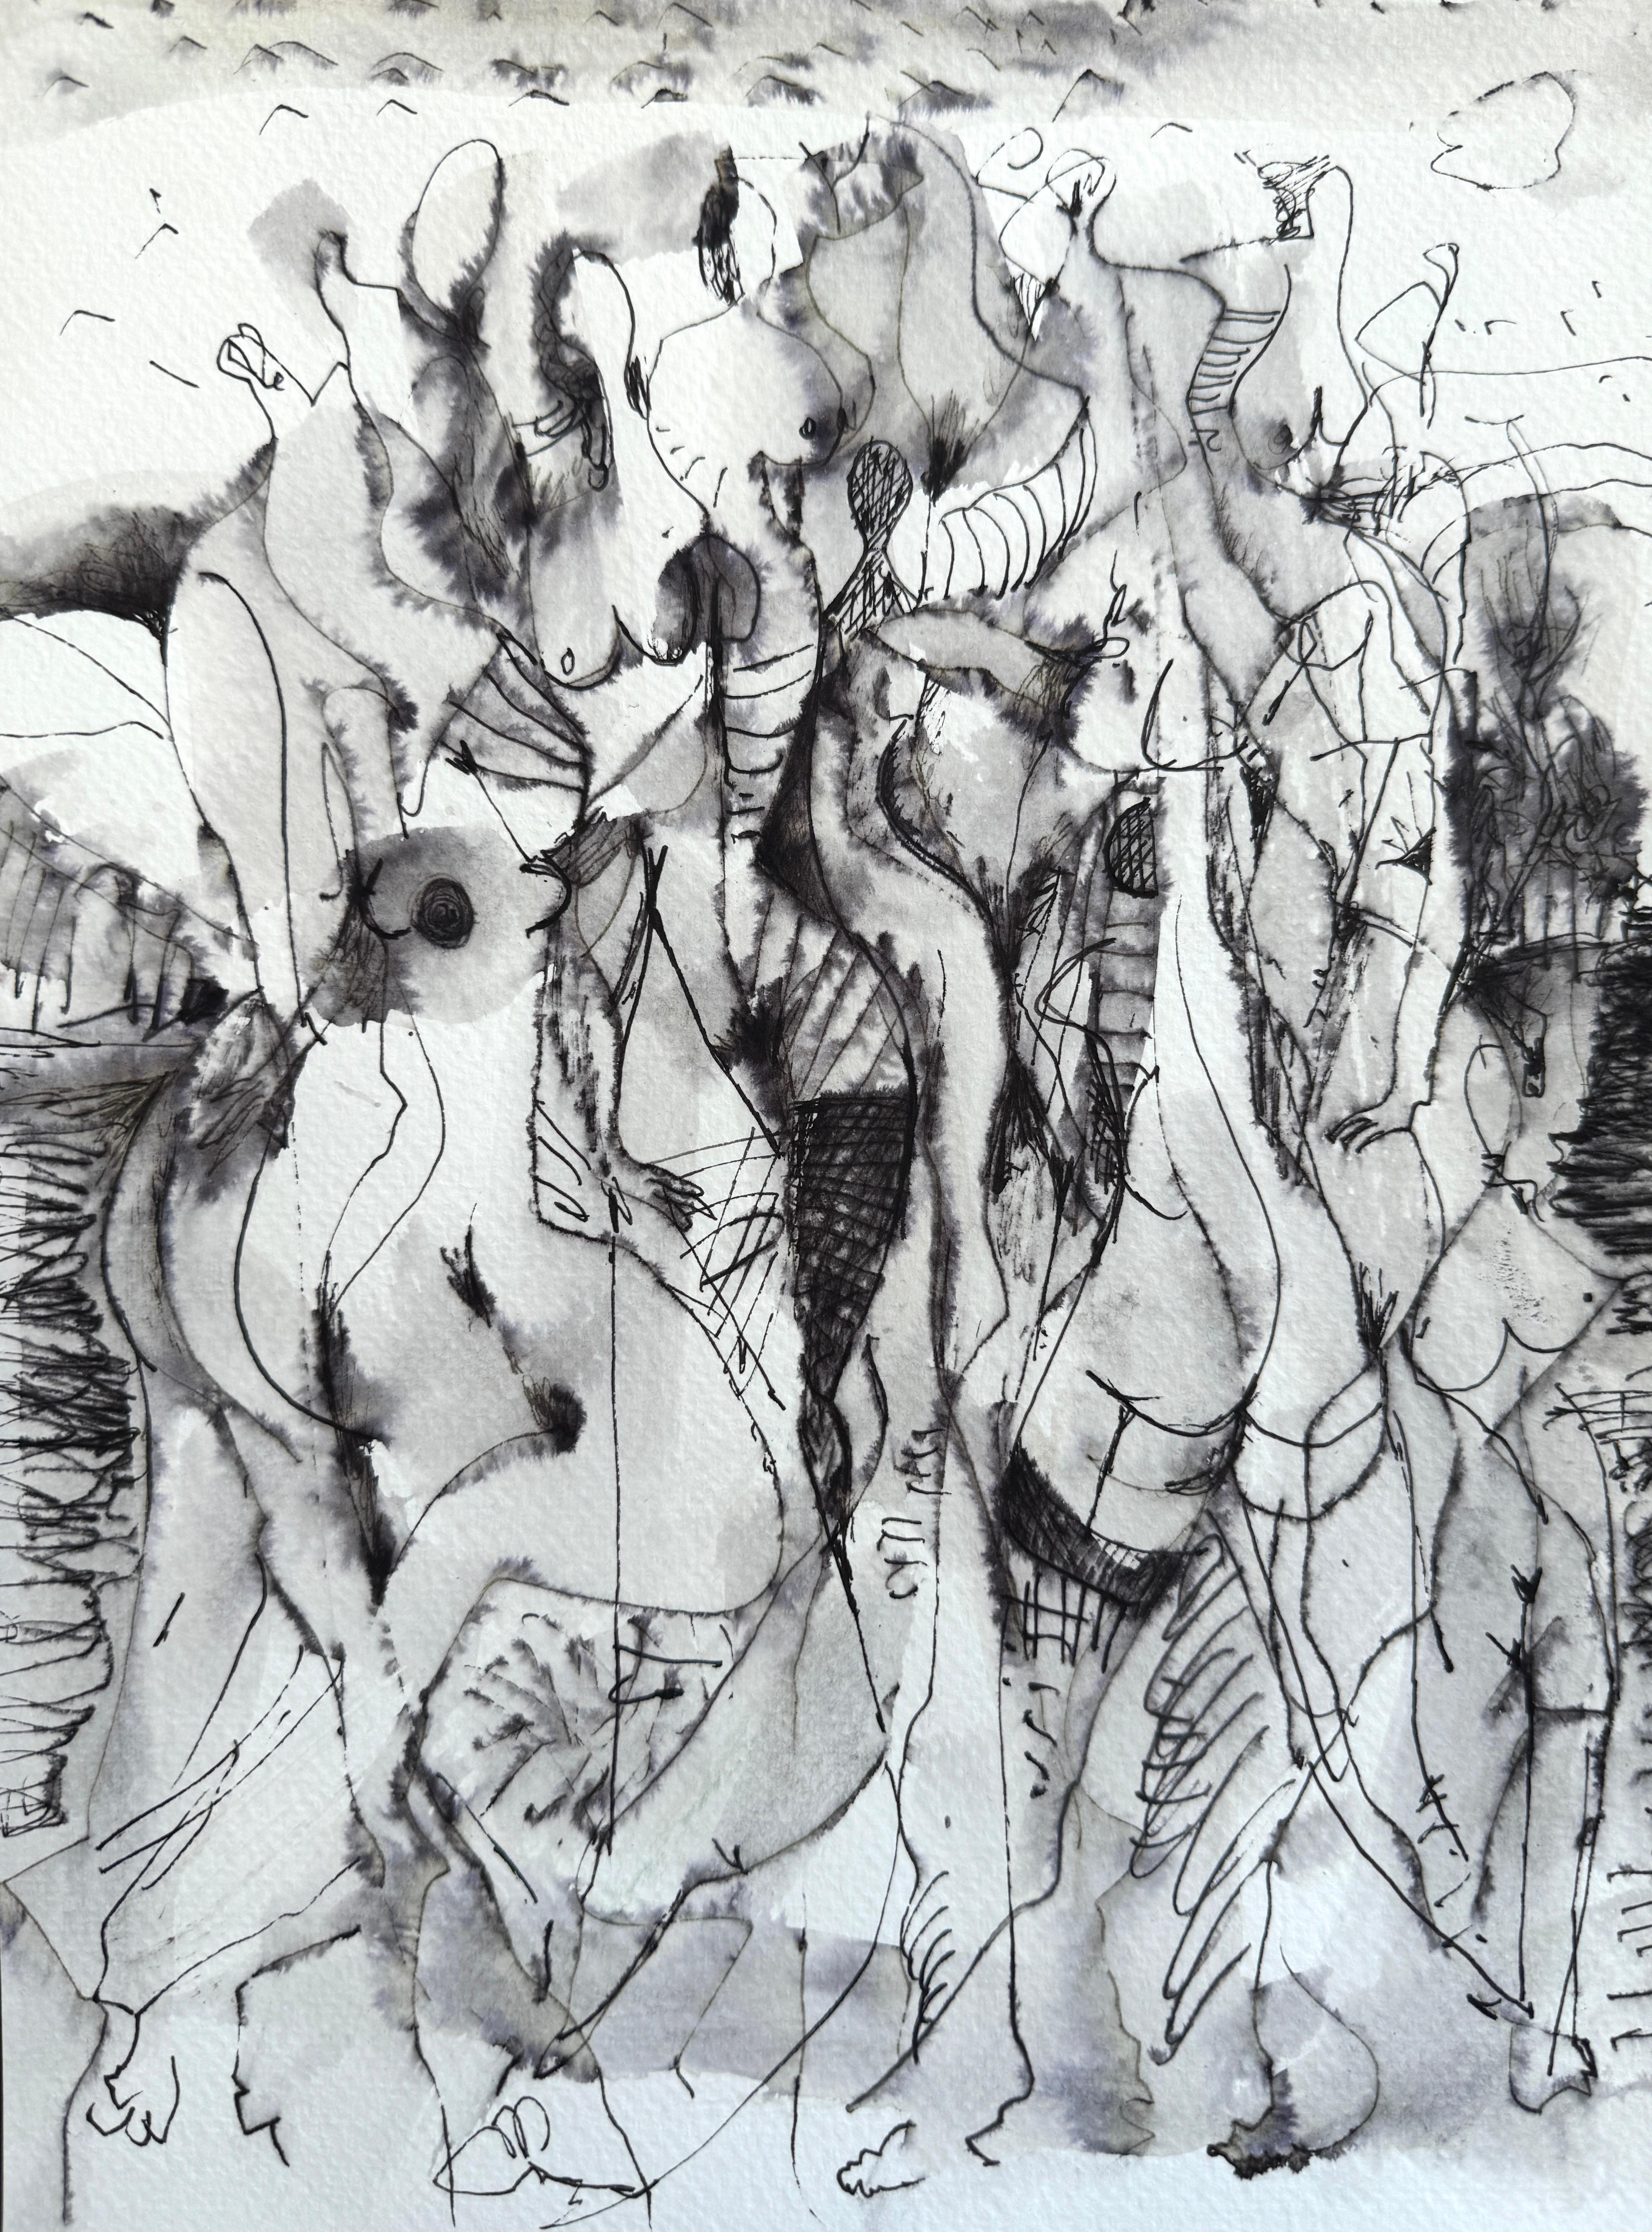 Mkrtich Sarkisyan (Mcho) Figurative Art - Journey, Figurative Original Painting, Ink on Paper, Black and White 